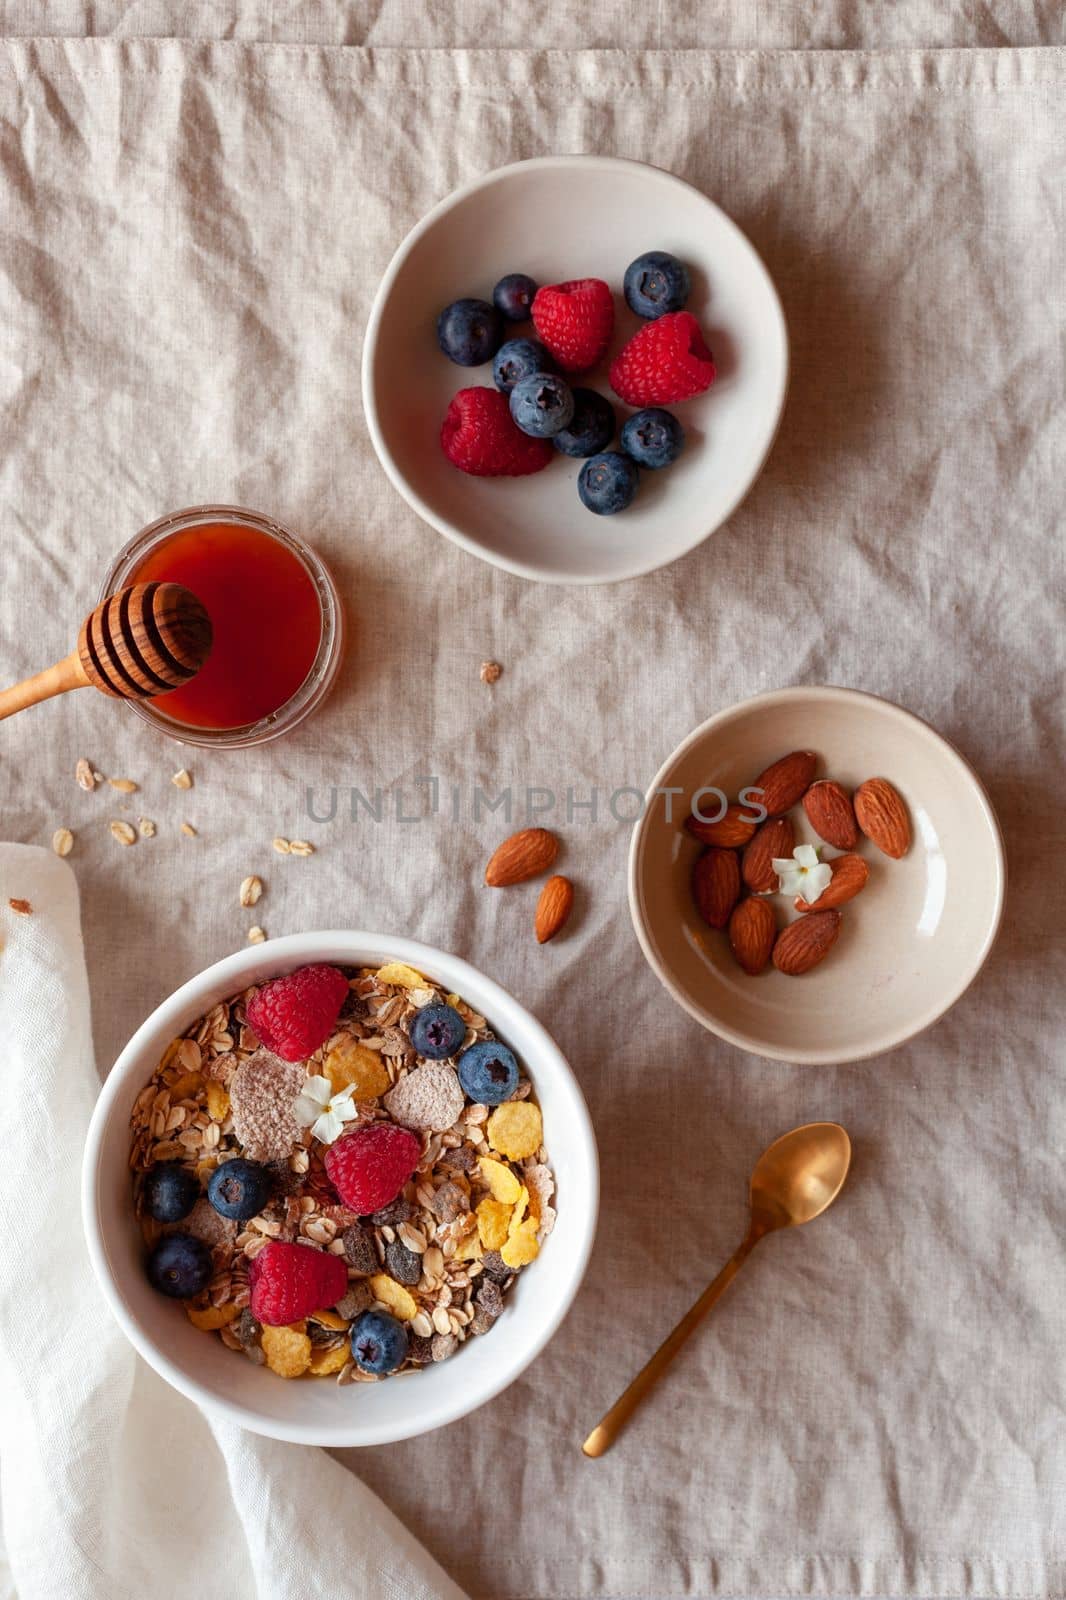 portion of morning breakfast of oat flakes, fresh berries, almonds and honey on the cotton table-cloth, top view